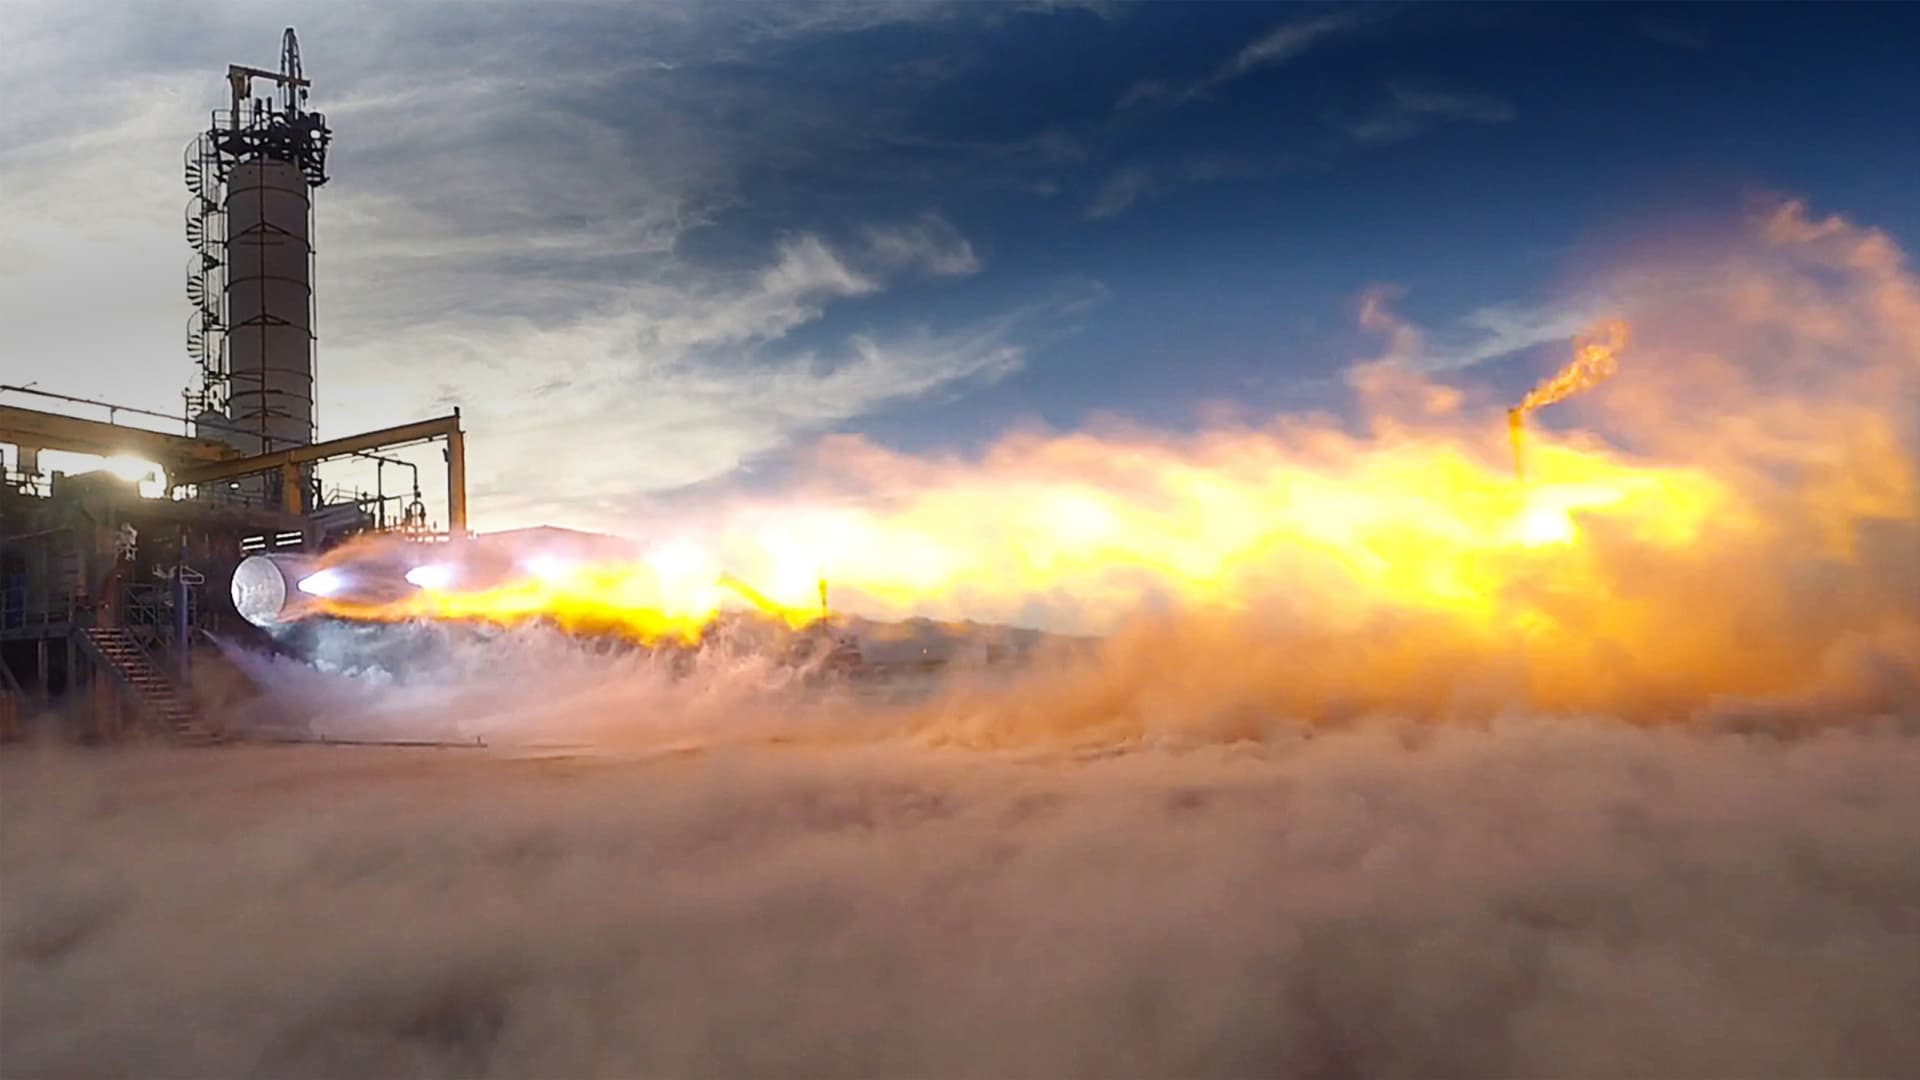 BE-4 engine test at Blue Origin's West Texas launch facility.